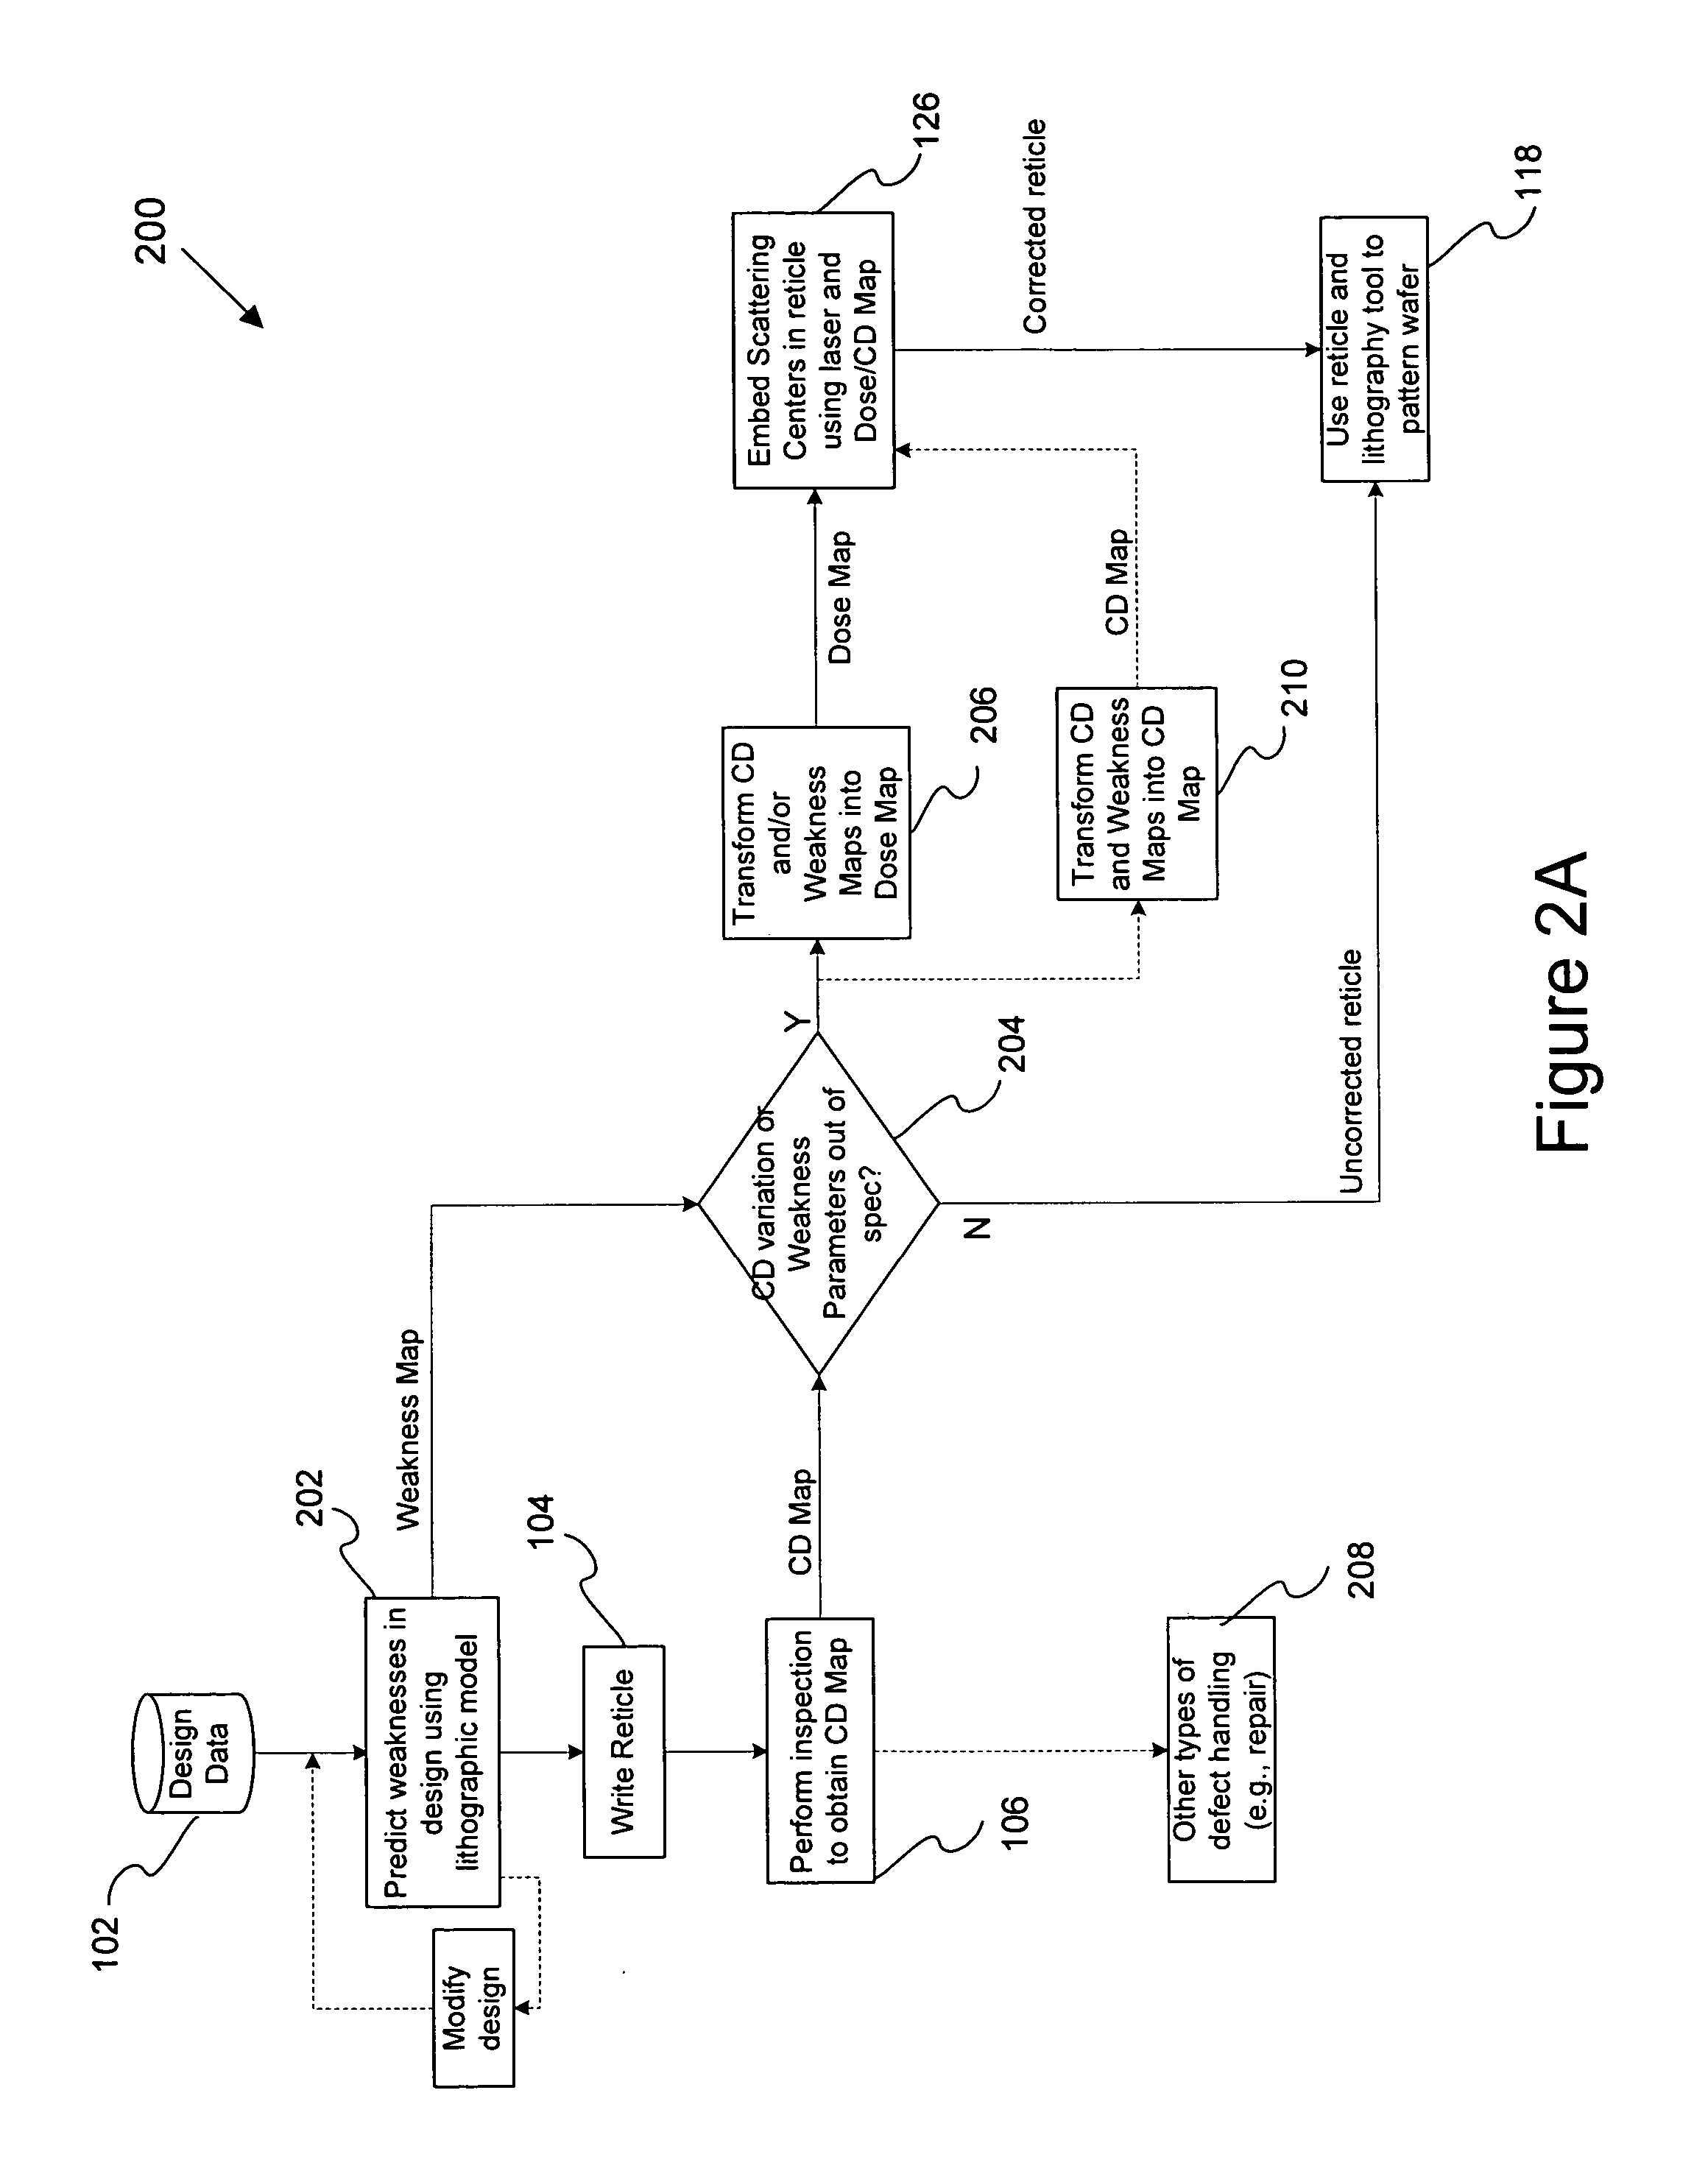 Systems and methods for modifying a reticle's optical properties